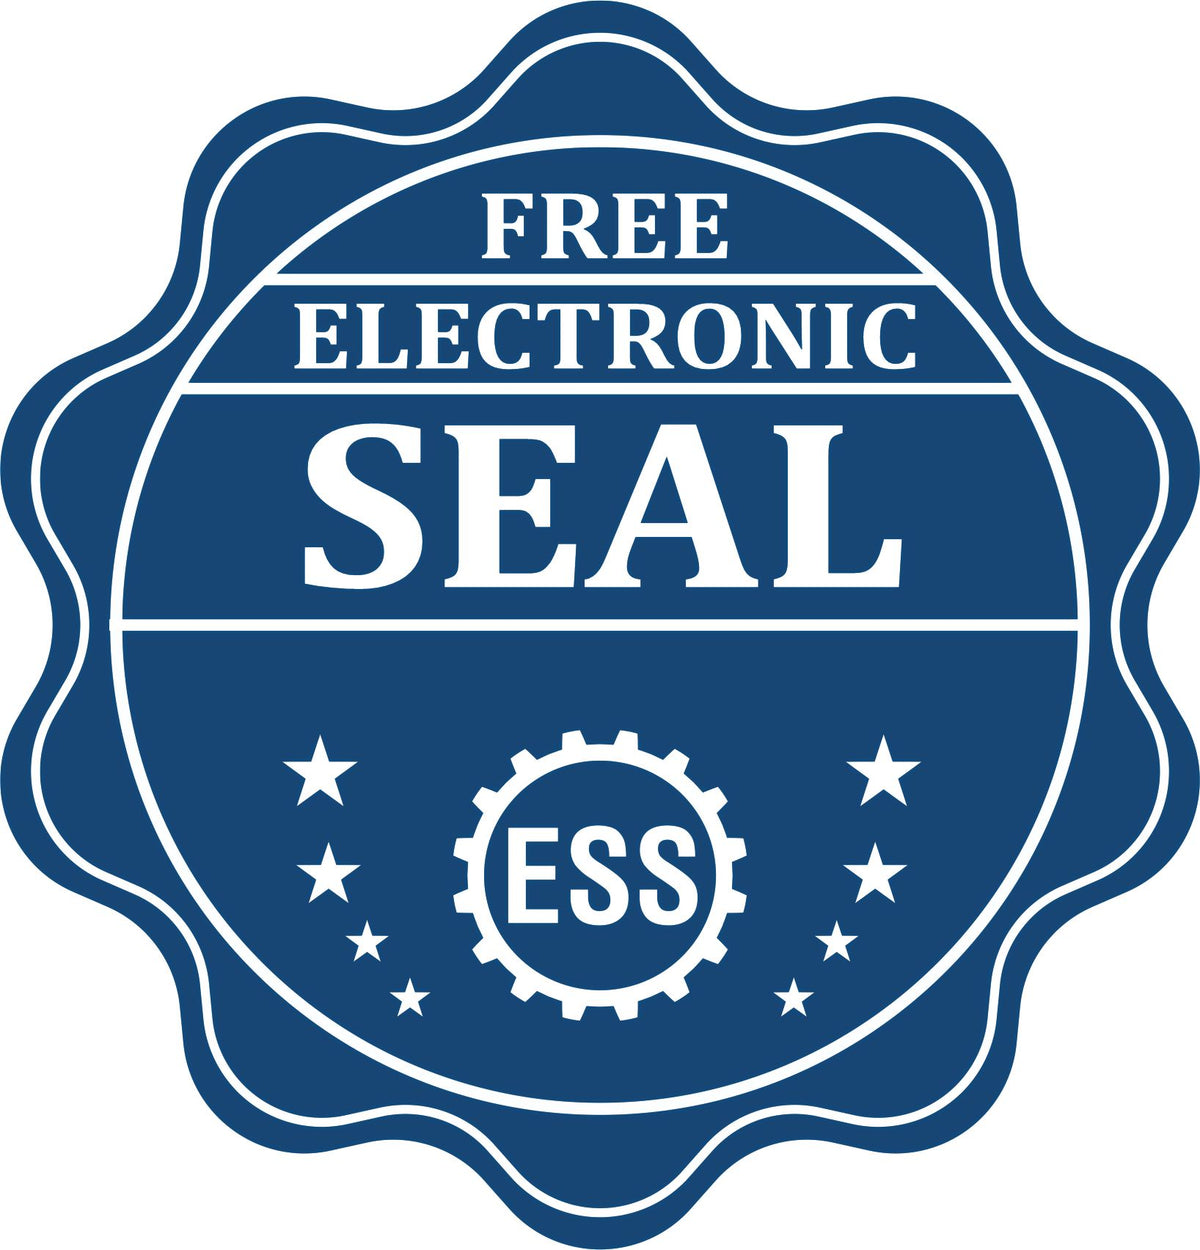 A badge showing a free electronic seal for the Soft Guam Professional Geologist Seal with stars and the ESS gear on the emblem.